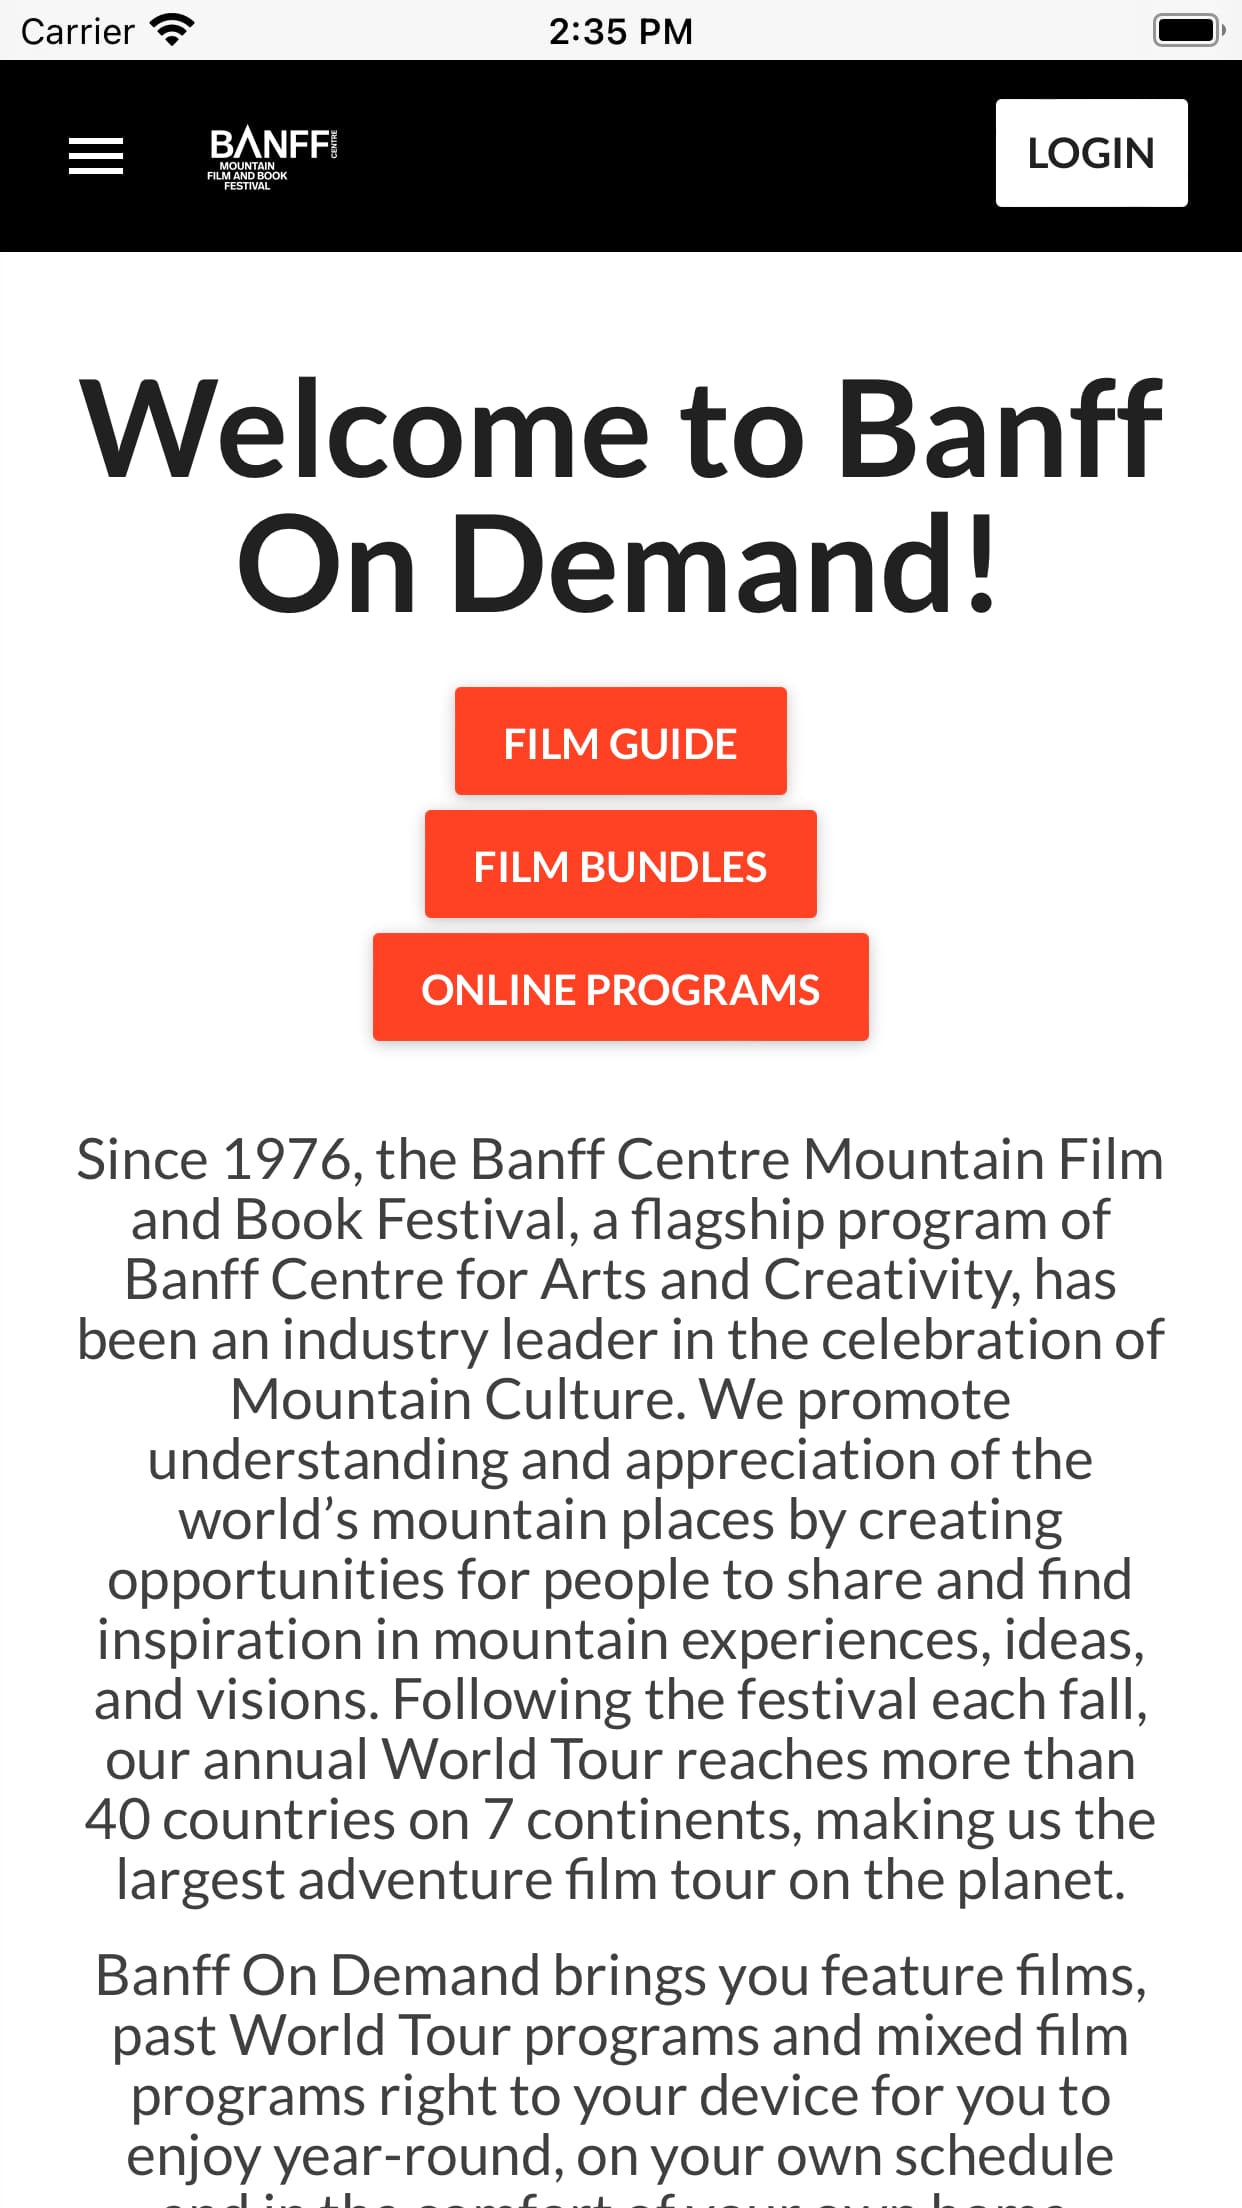 Welcome to Banff on Demand!